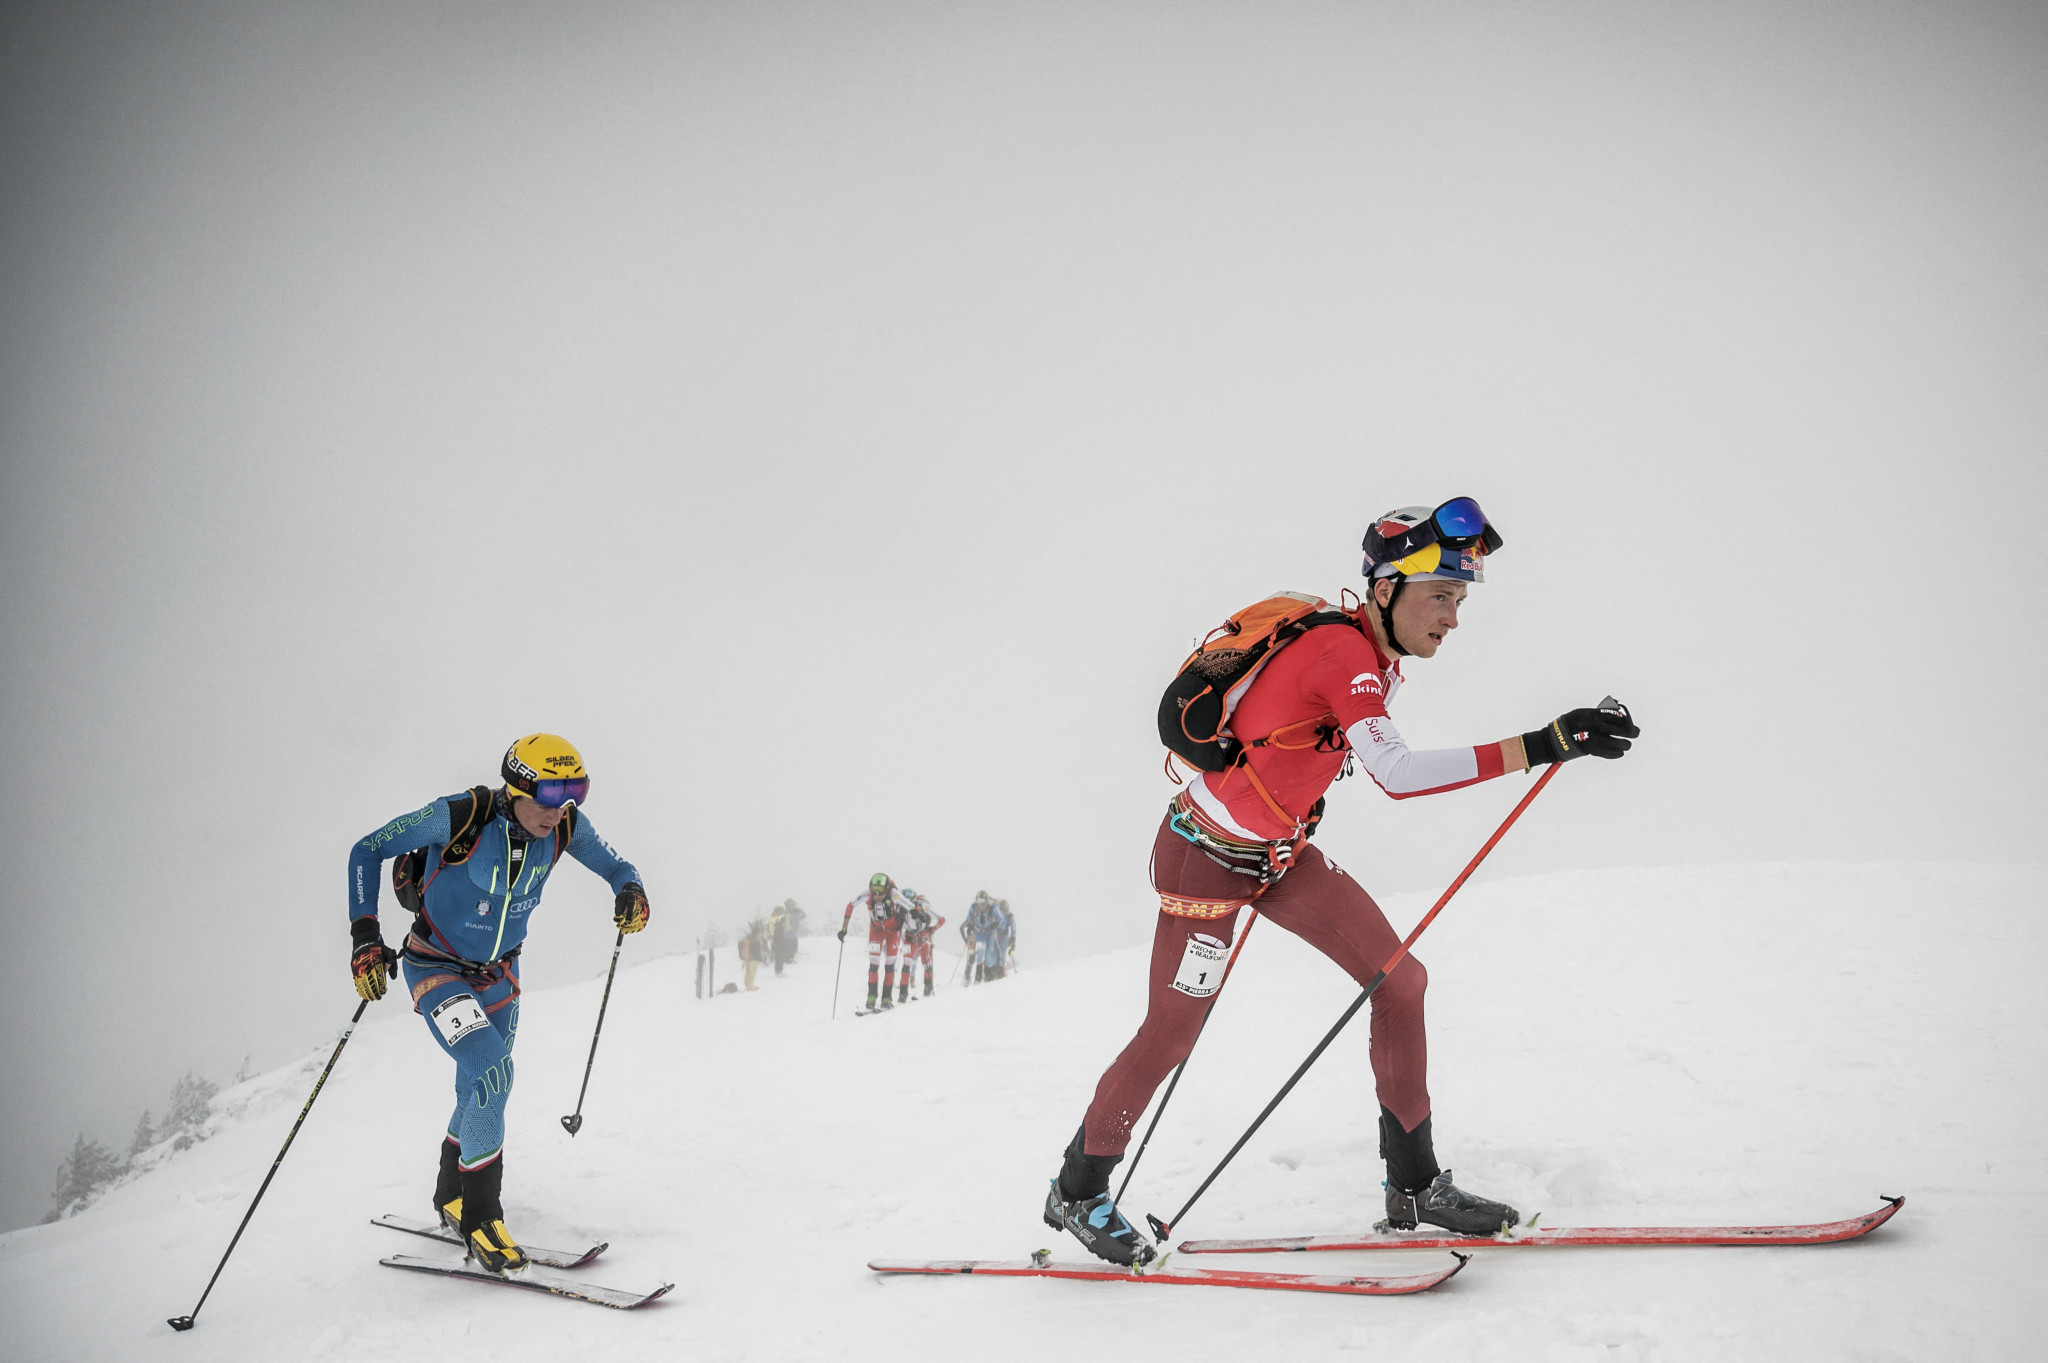 Ski mountaineering is among the sports that are set to take place on the Stelvio slope ©Getty Images